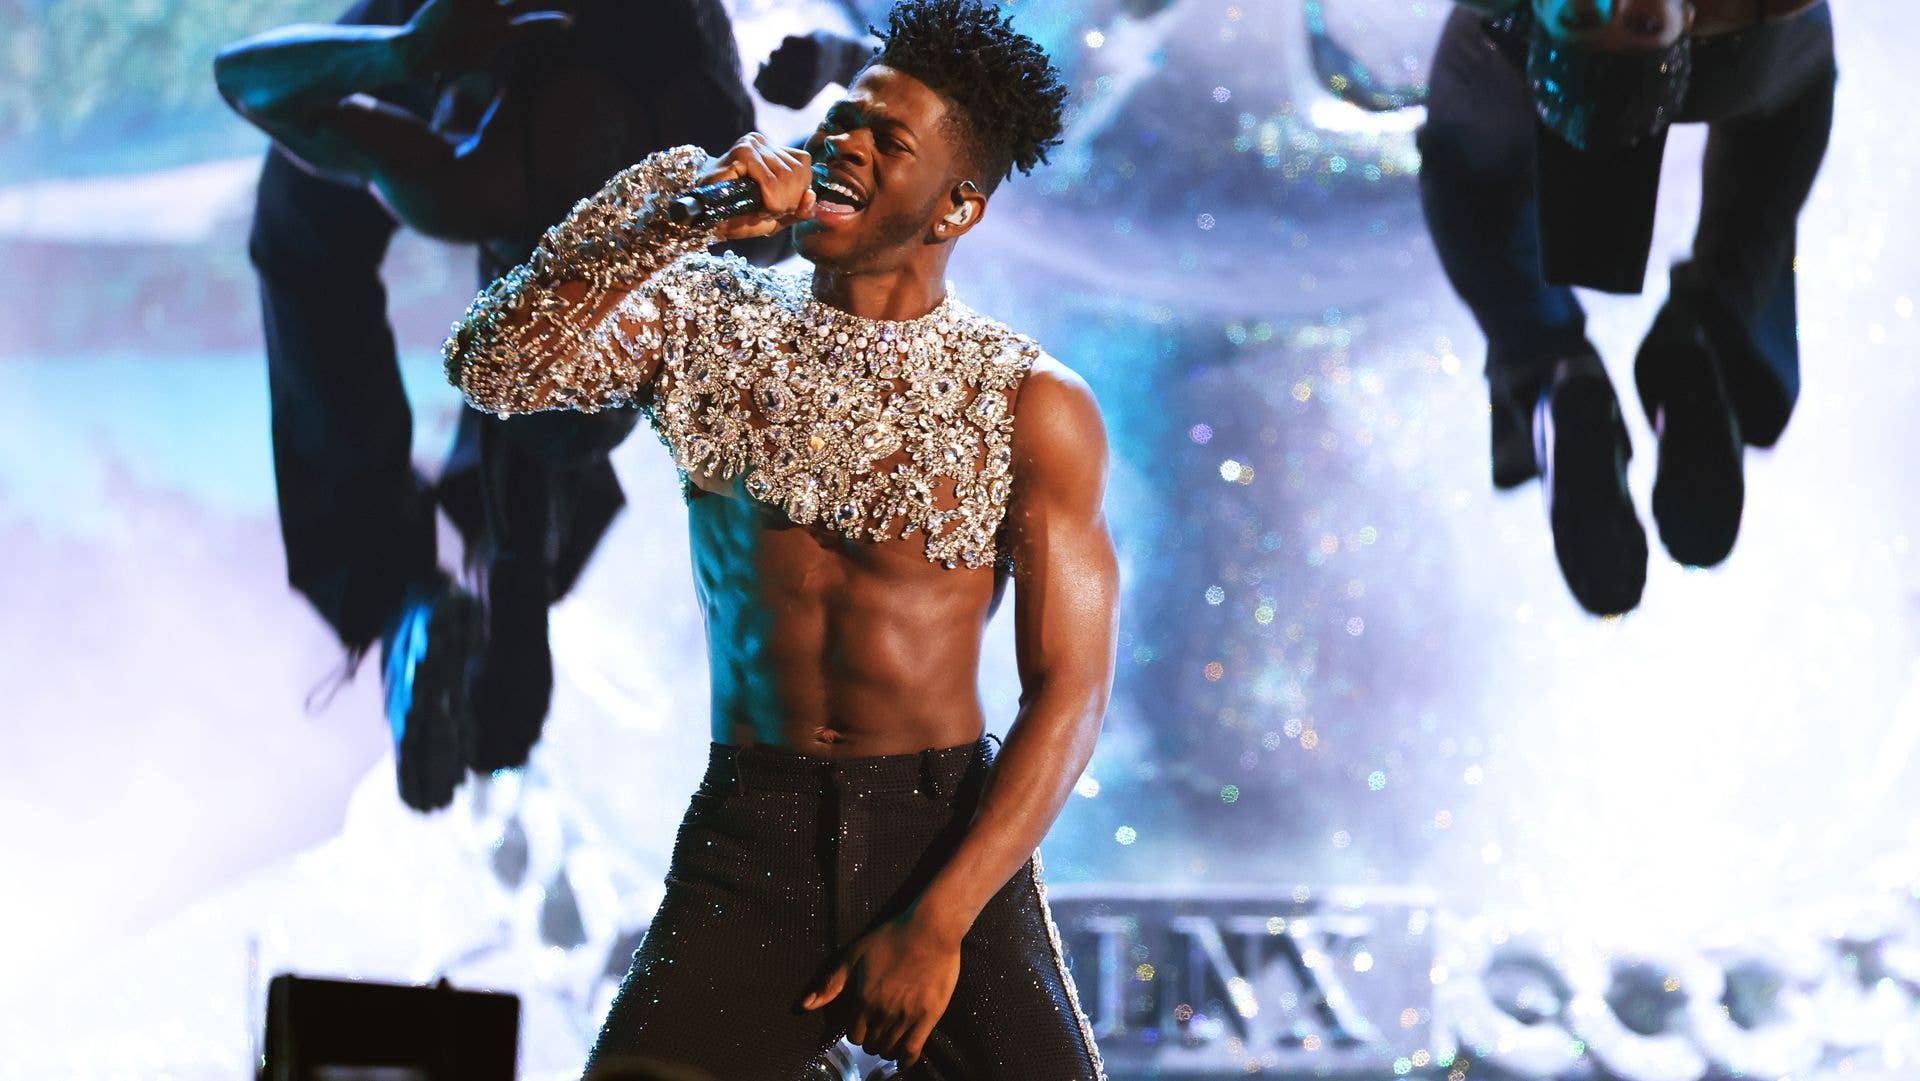 Lil Nas X performs at the Grammys